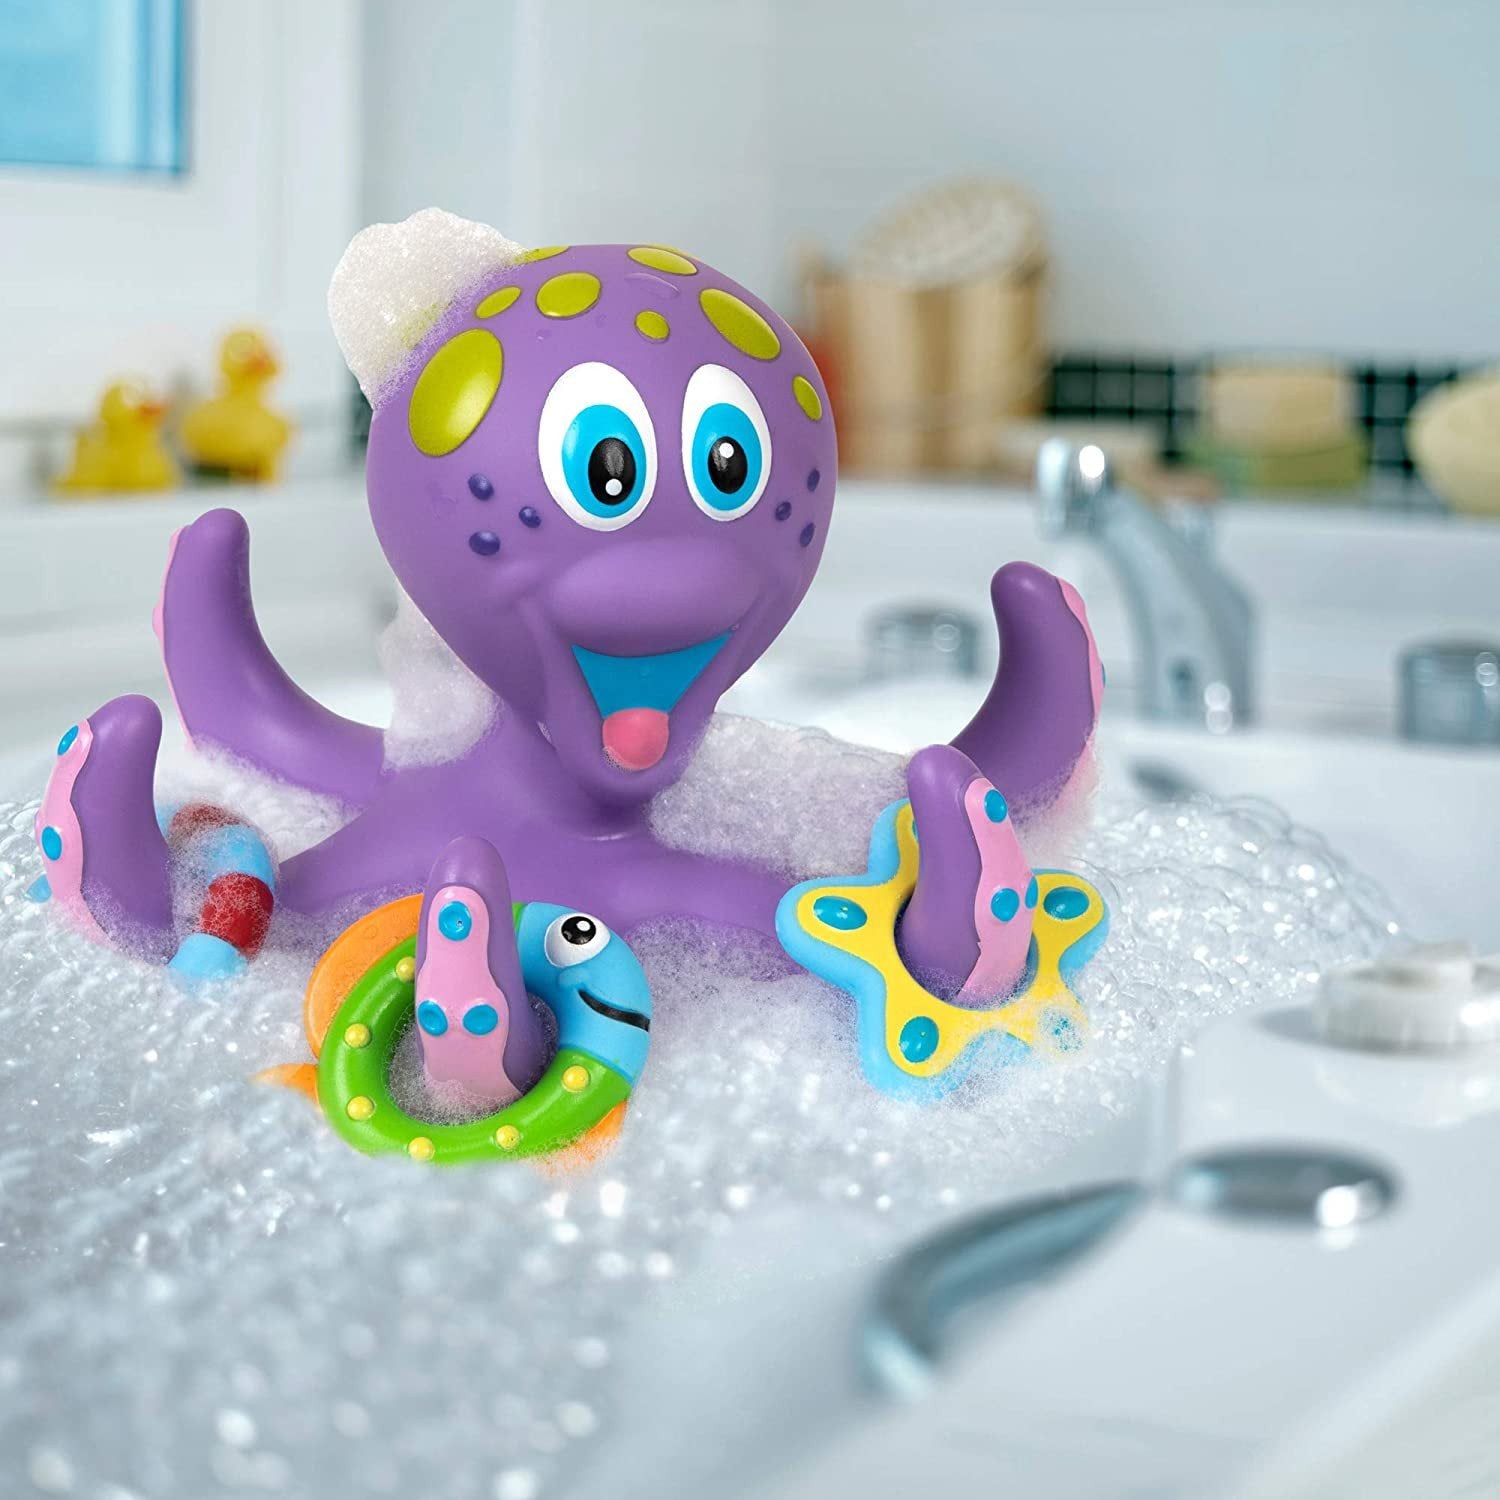 Nuby Floating Purple Octopus with 3 Hoopla Rings Interactive Bath Toy.